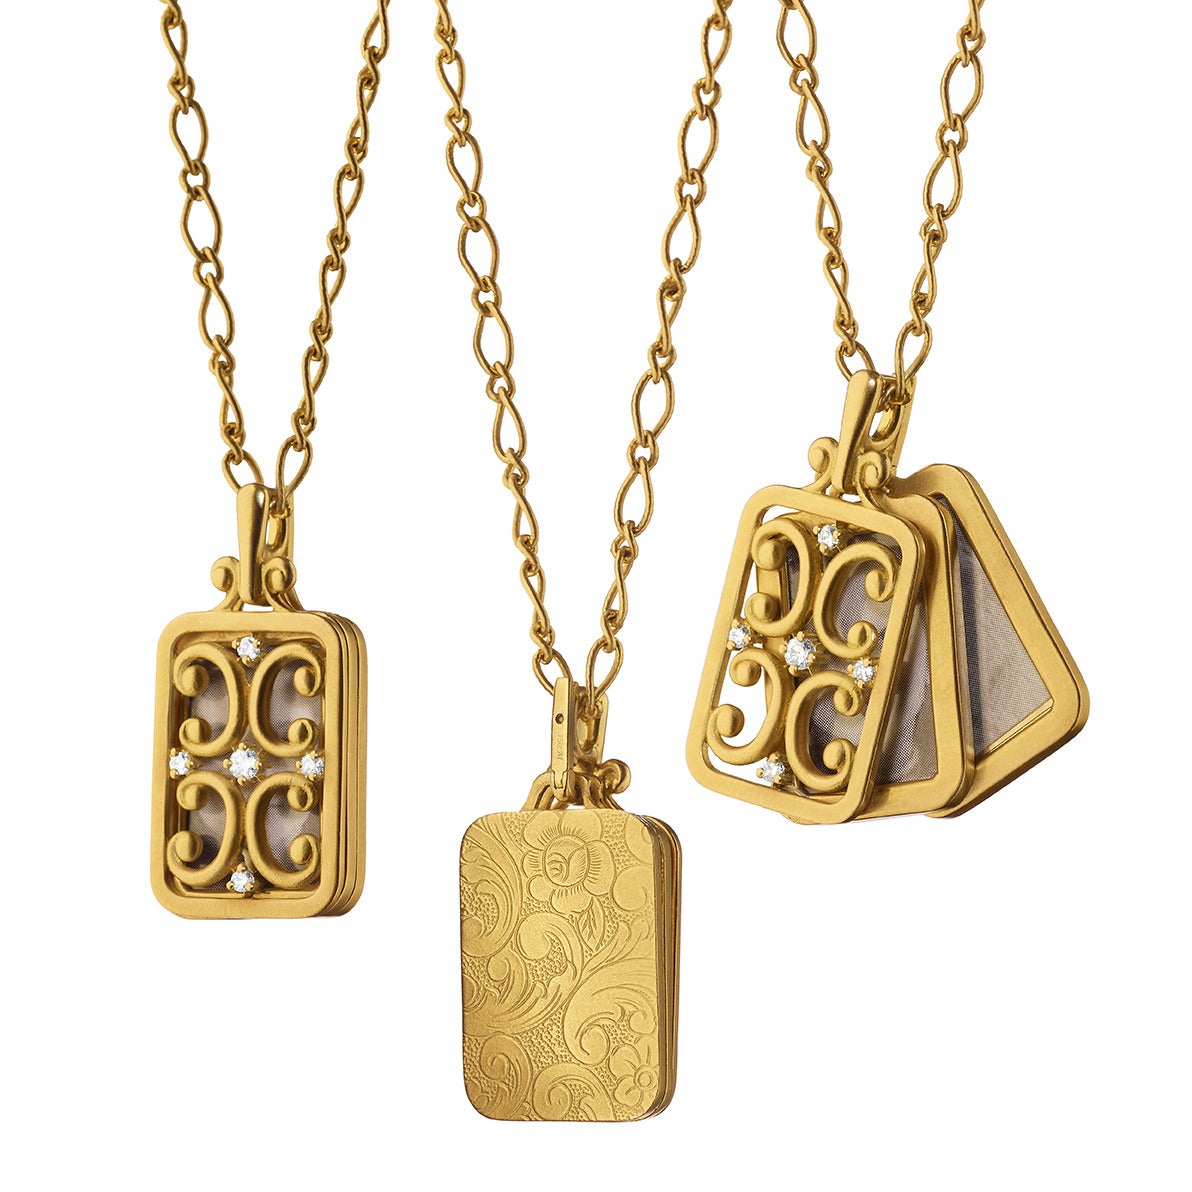 An 18K gold rectangular gate locket in a satin finish with image cases to hold either two or three photos (the first image case could hold a photo on each side), accented by diamonds, the reverse with our signature floral pattern. Our gate locket